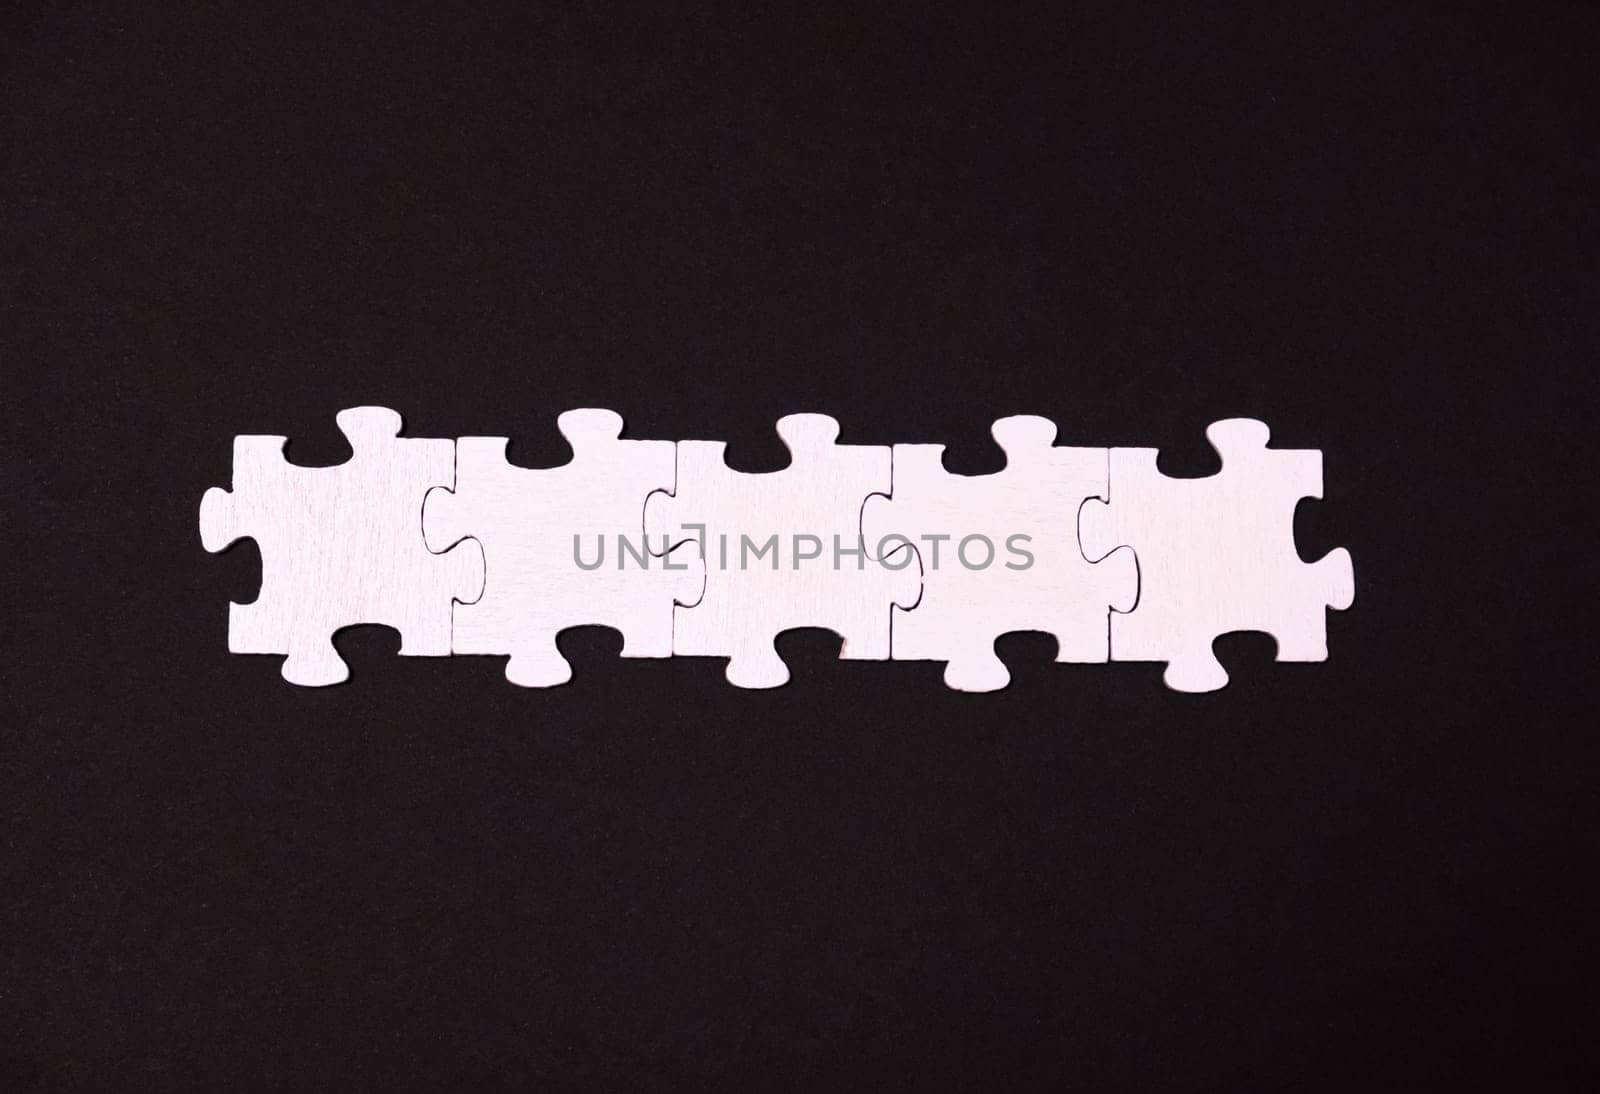 A row of white puzzle pieces on a black background. Concept of order and structure, as the pieces are neatly arranged in a row. The black background adds a sense of contrast and focus to the image